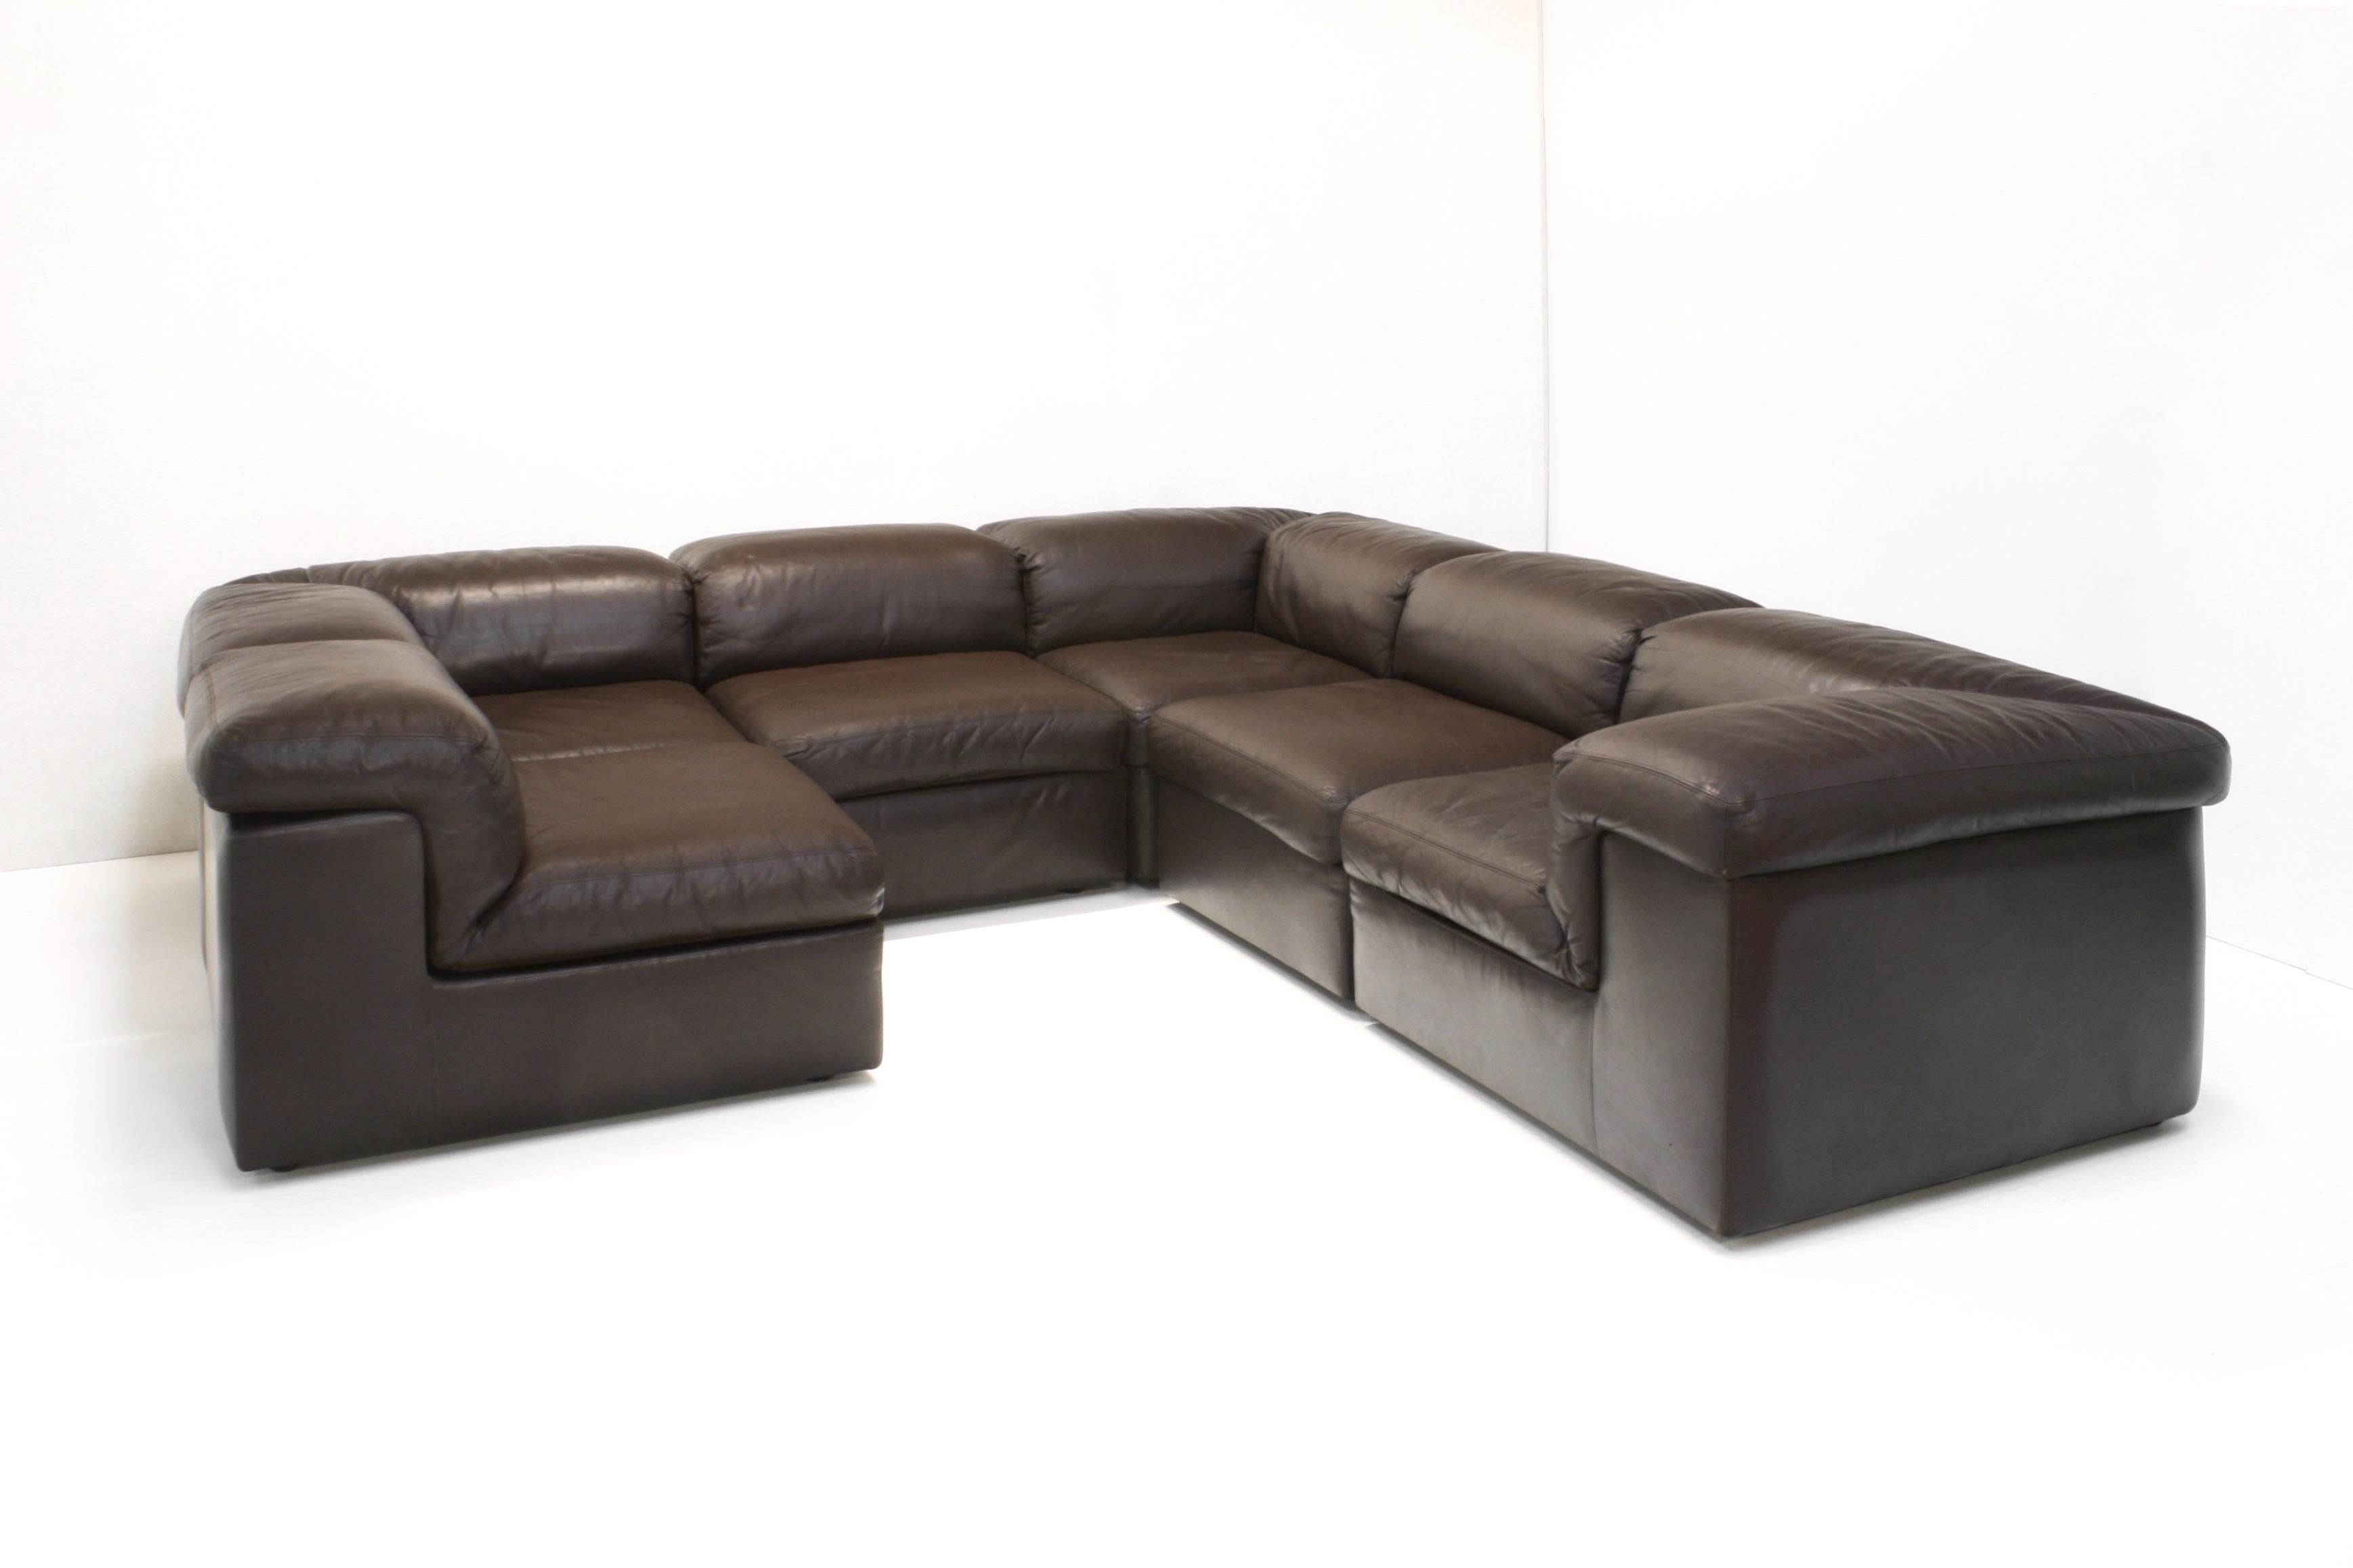 Mid-Century Modern Modular Brown Leather Jeep Sectional Sofa by Anita Schmidt for Durlet, 1970s For Sale